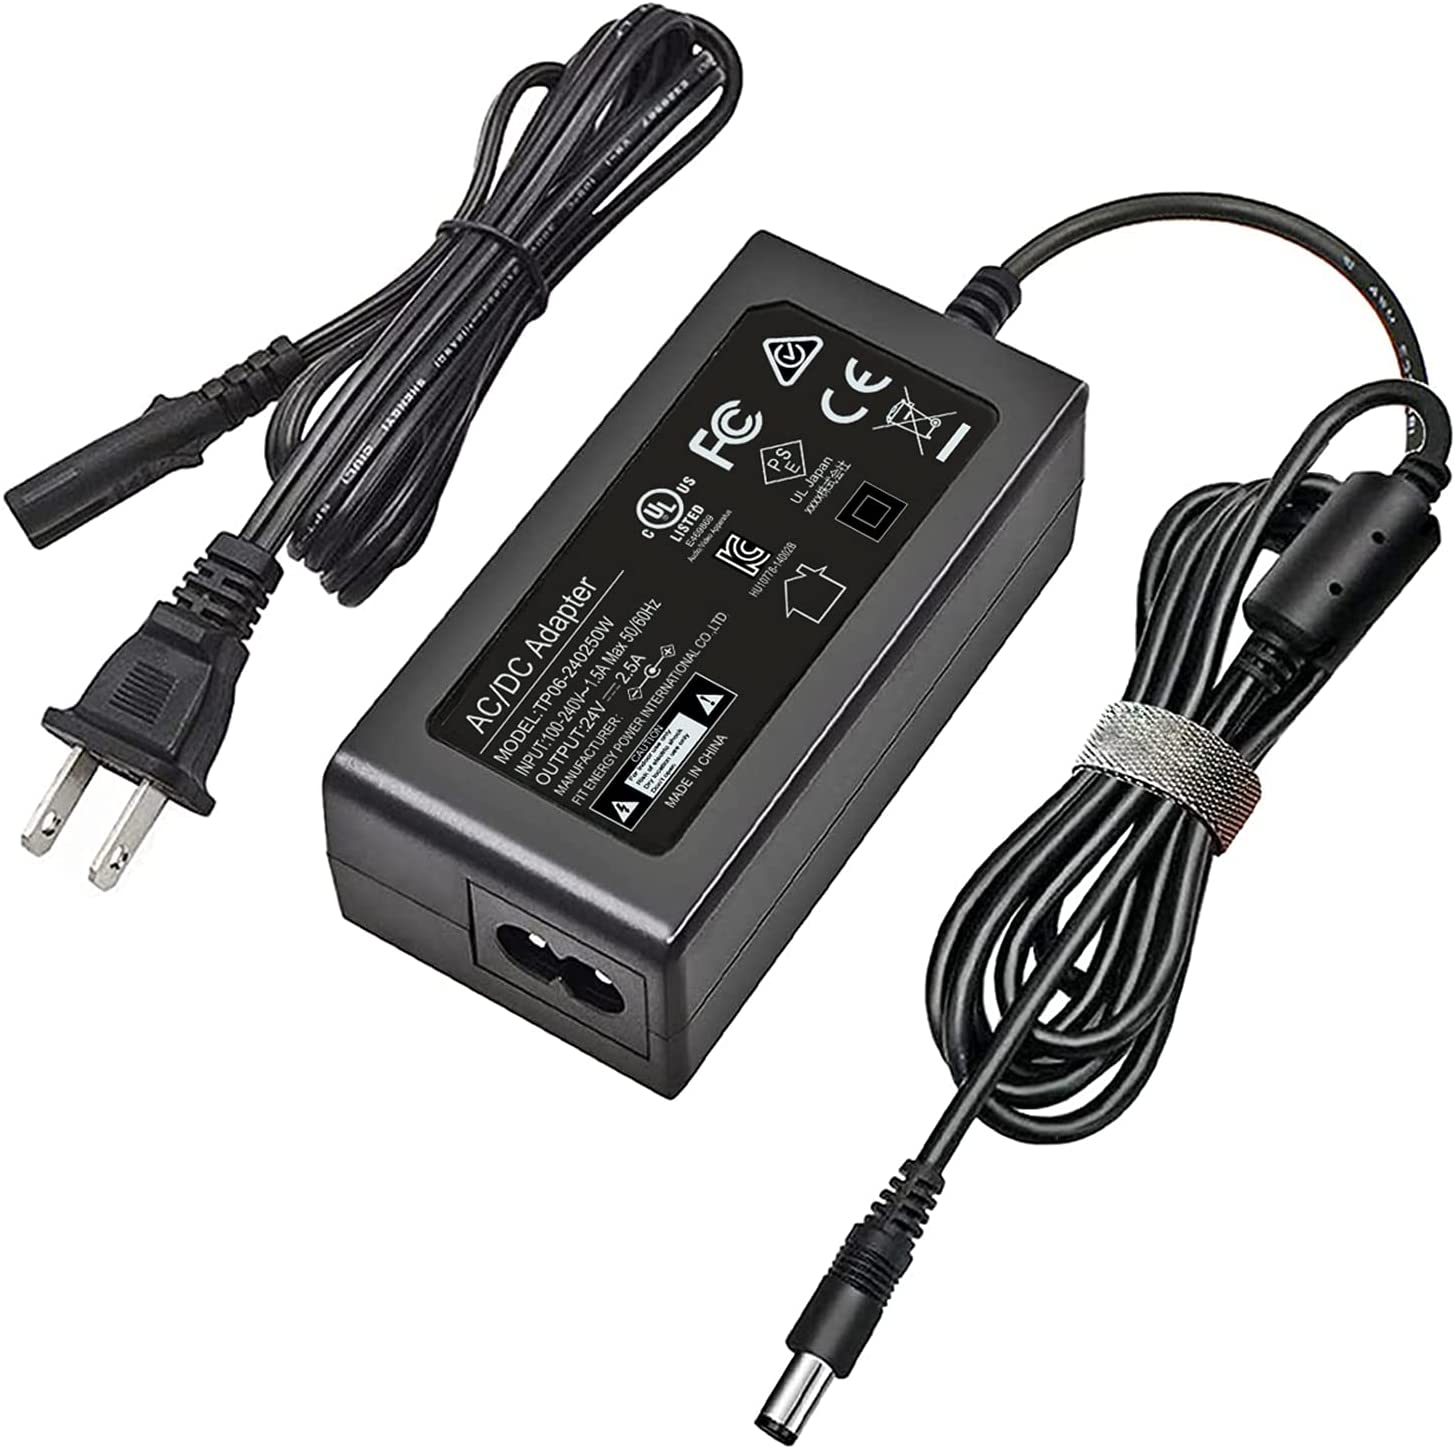 DSA-65W-224060 24V AC/DC Adapter Power Cord UL Listed Replacement for Silhouette Cameo 1 2 3 4 SD Portrait Ele